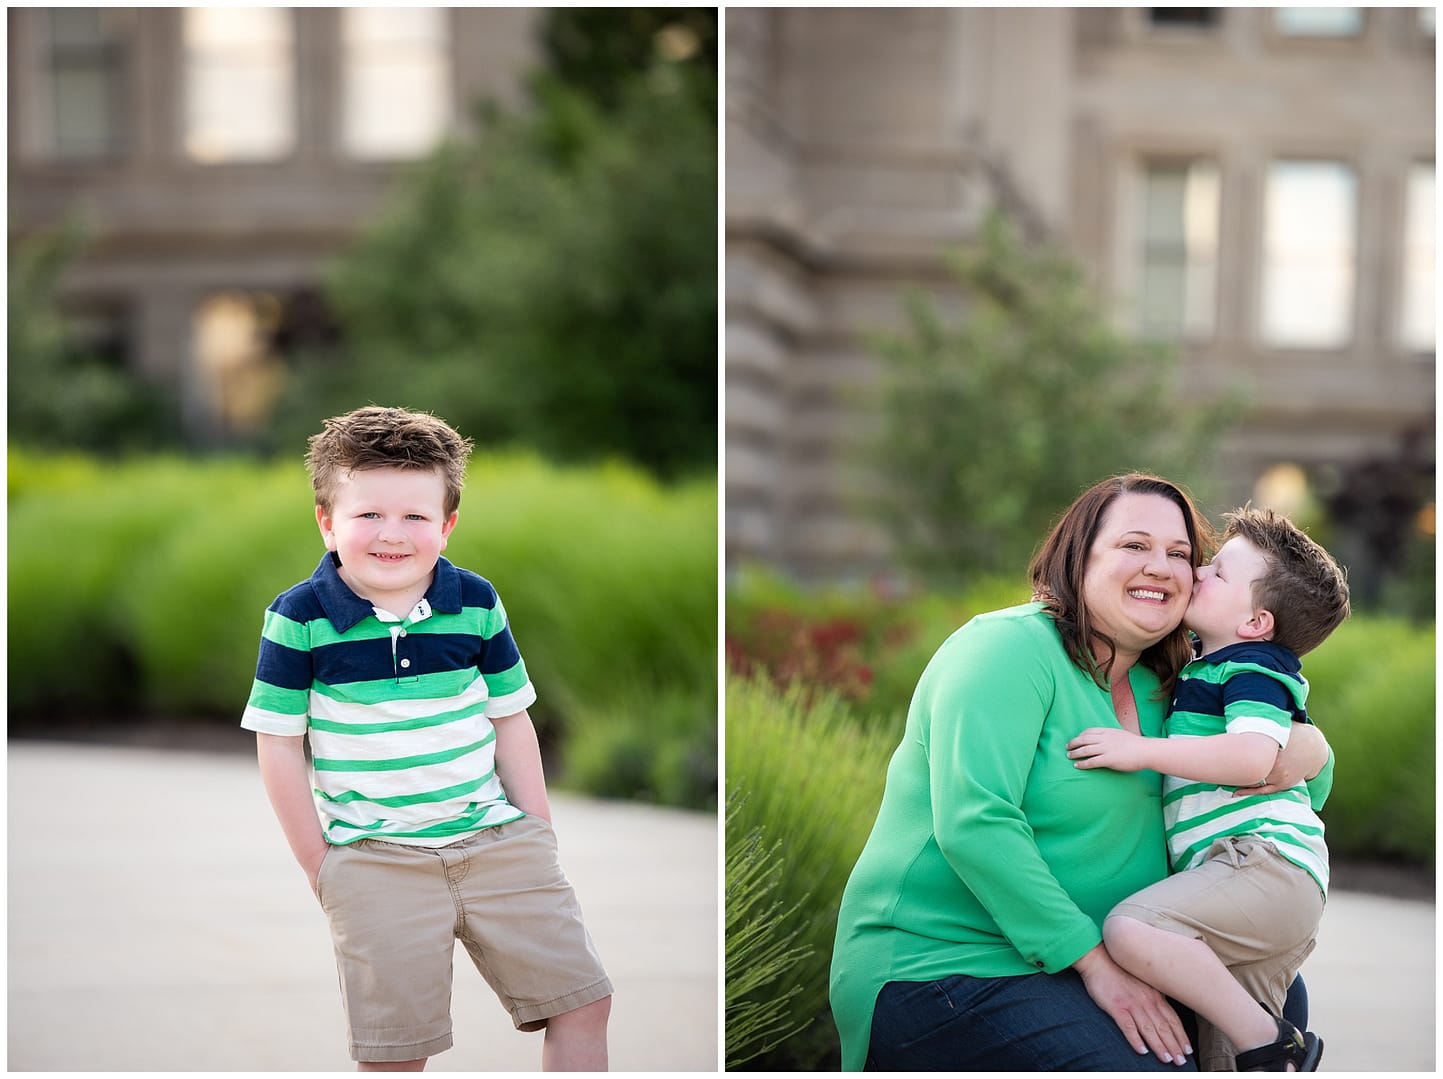 Son loves on mom in portrait. Photos by Tiffany Hix Photography.